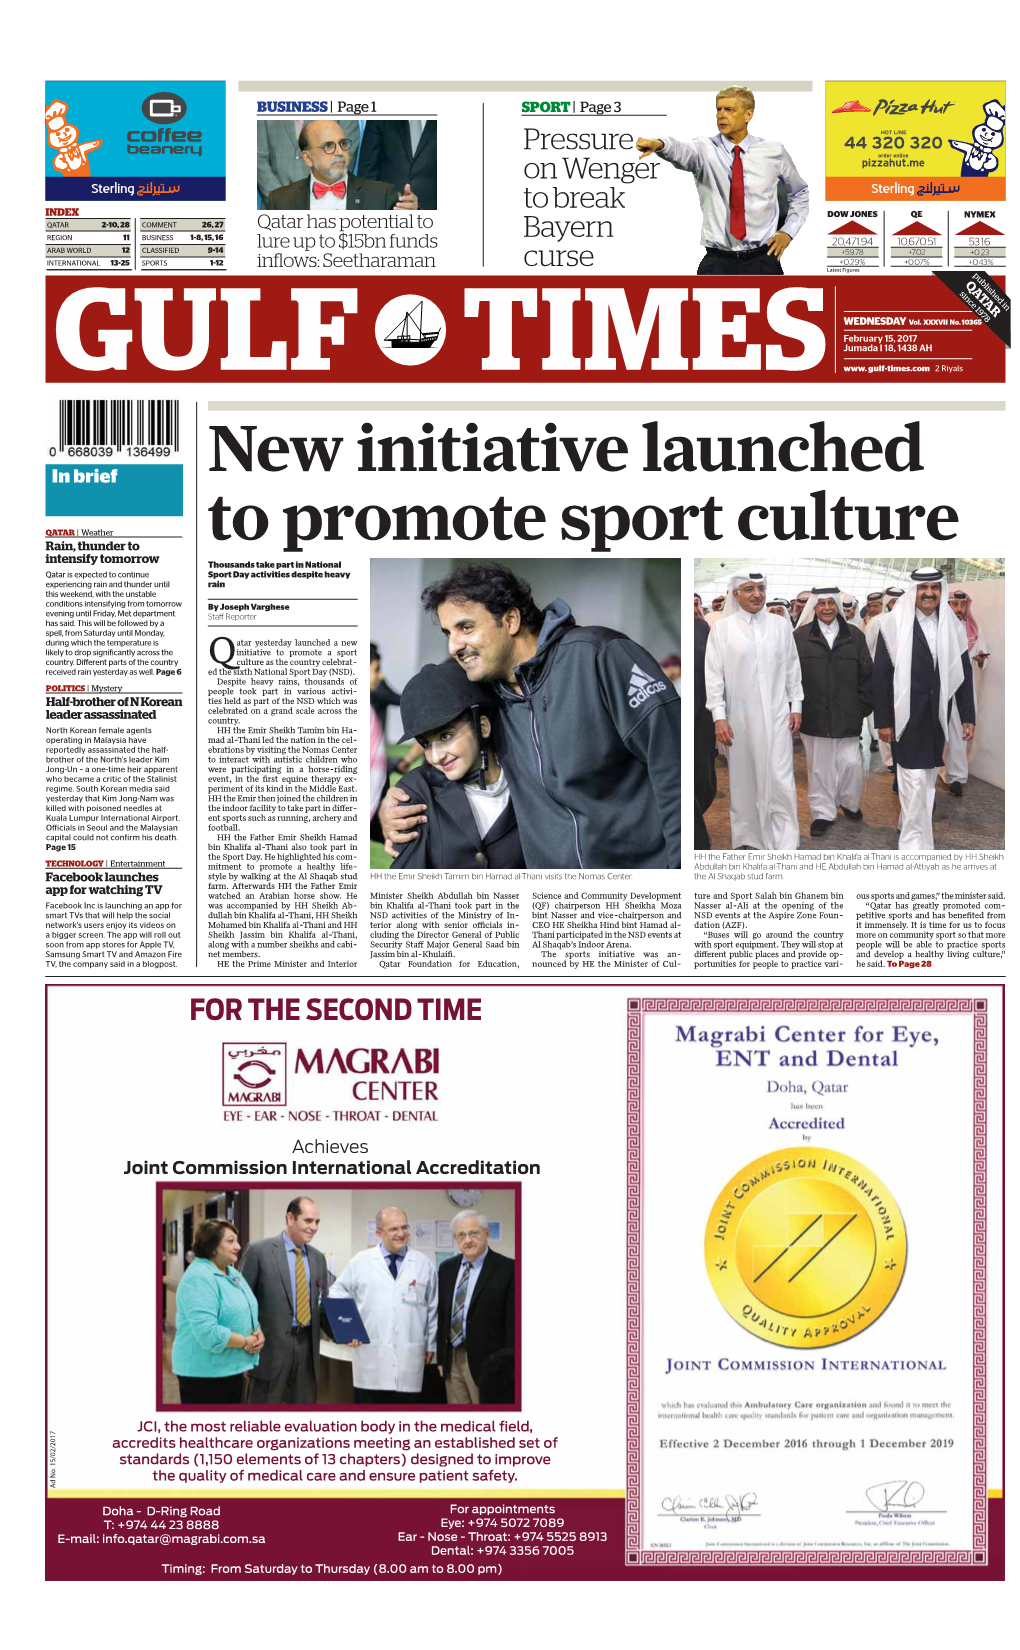 New Initiative Launched to Promote Sport Culture